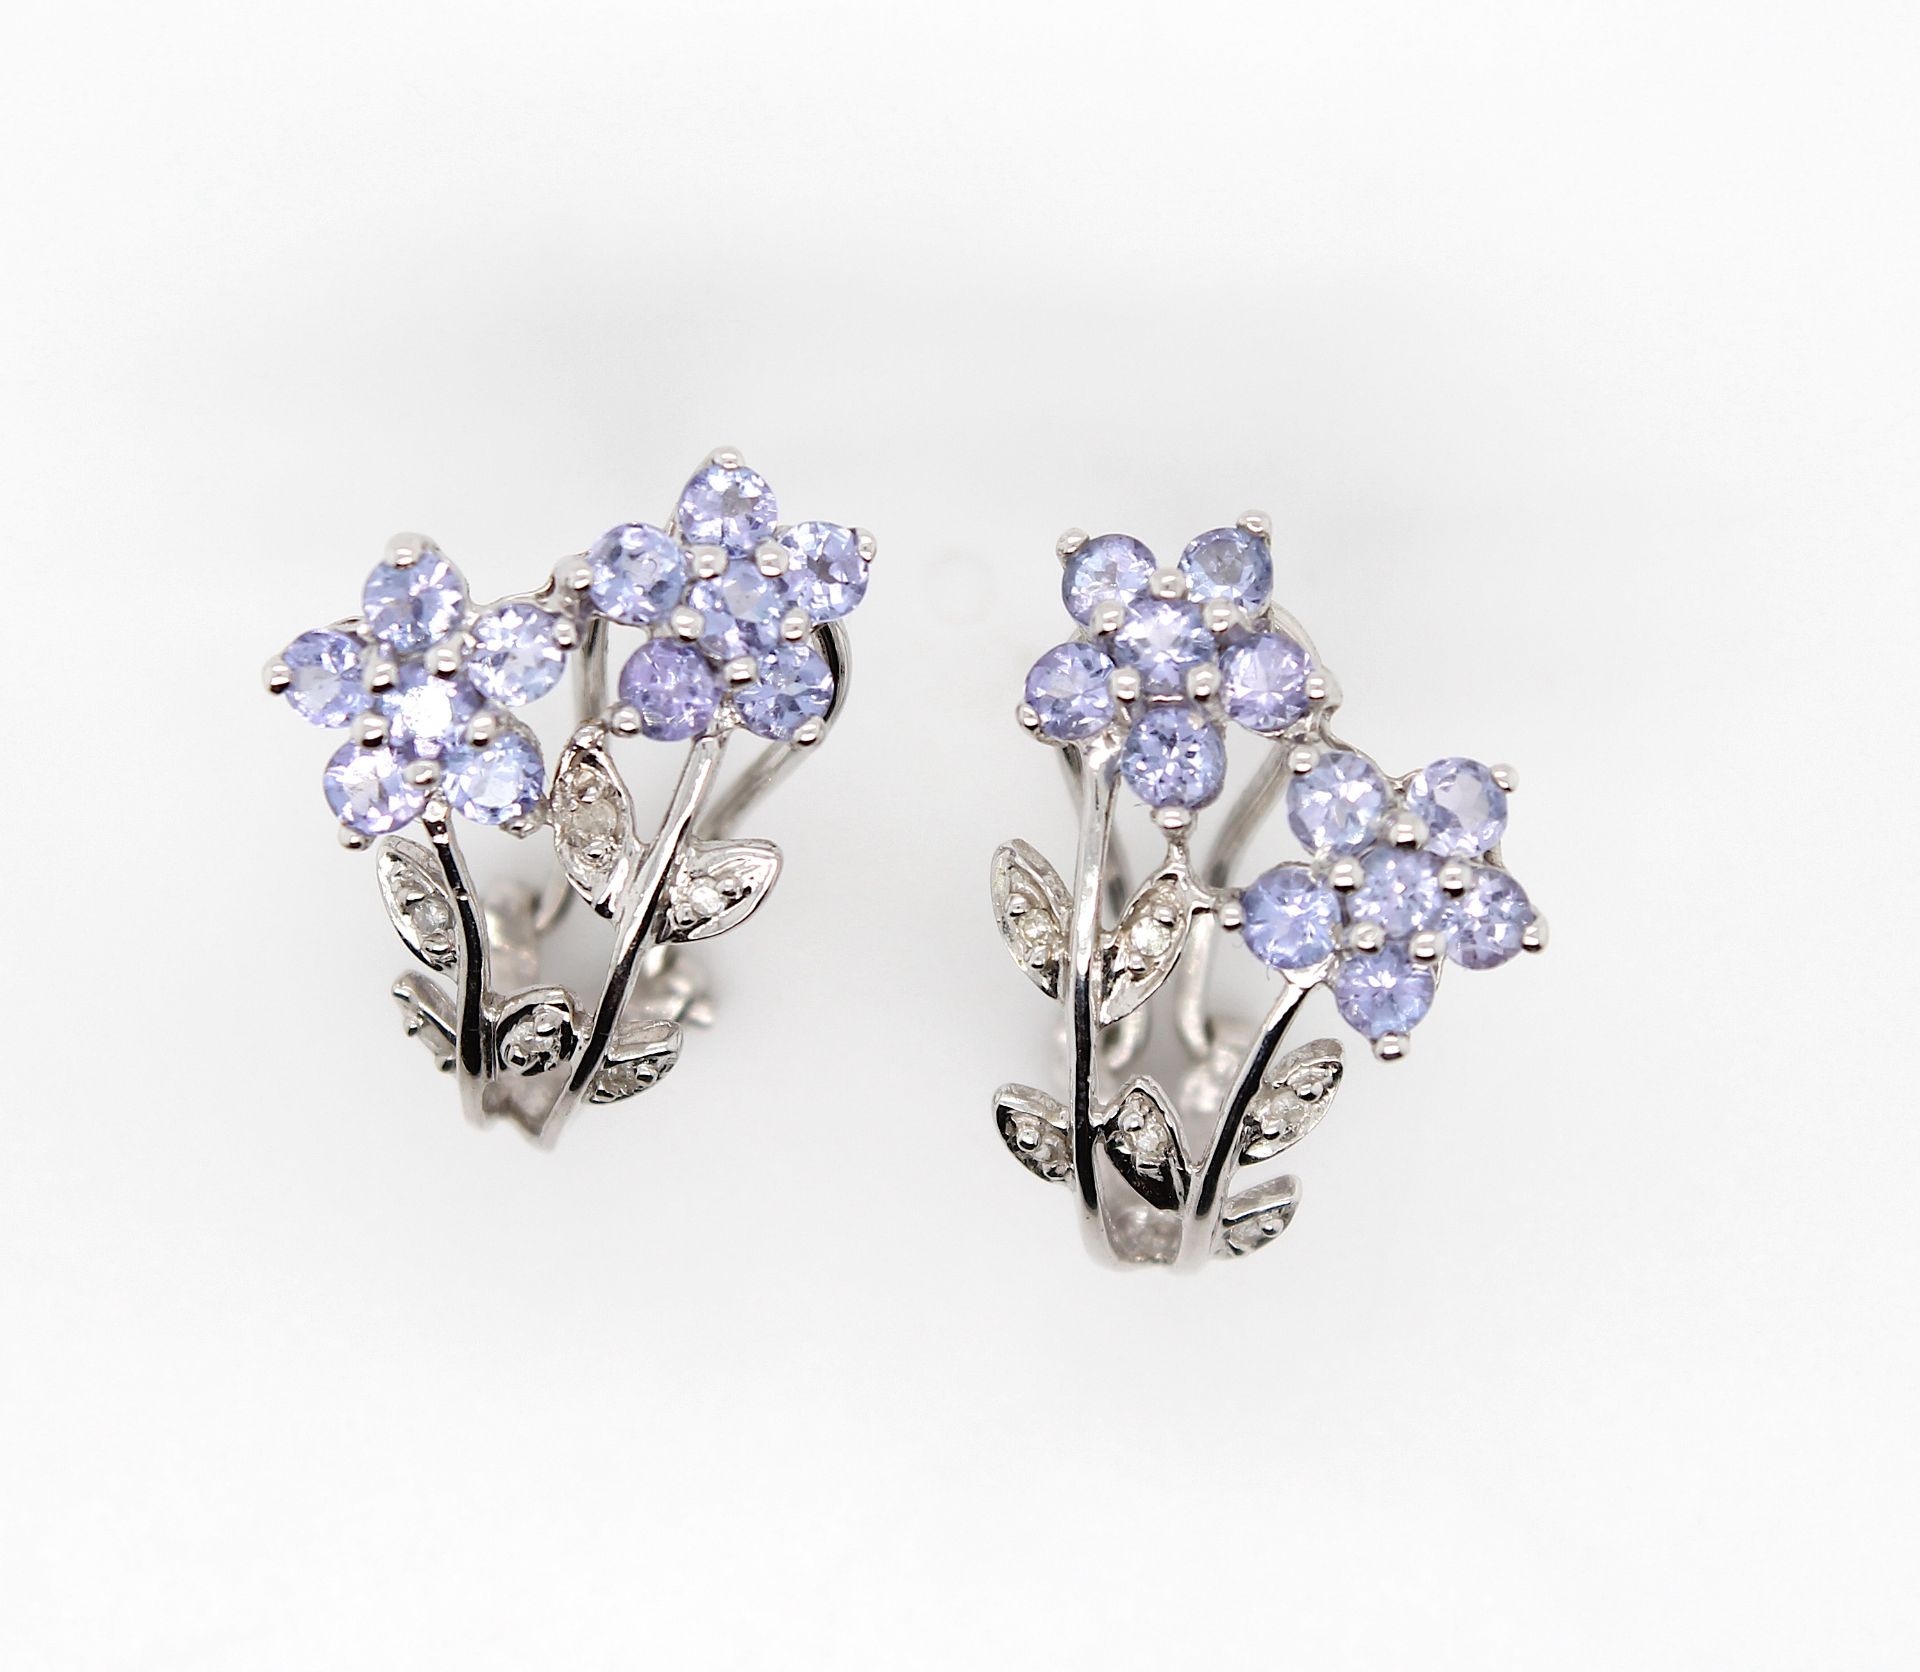 Stud earrings and a pendant with tanzanites and diamonds - Image 2 of 5